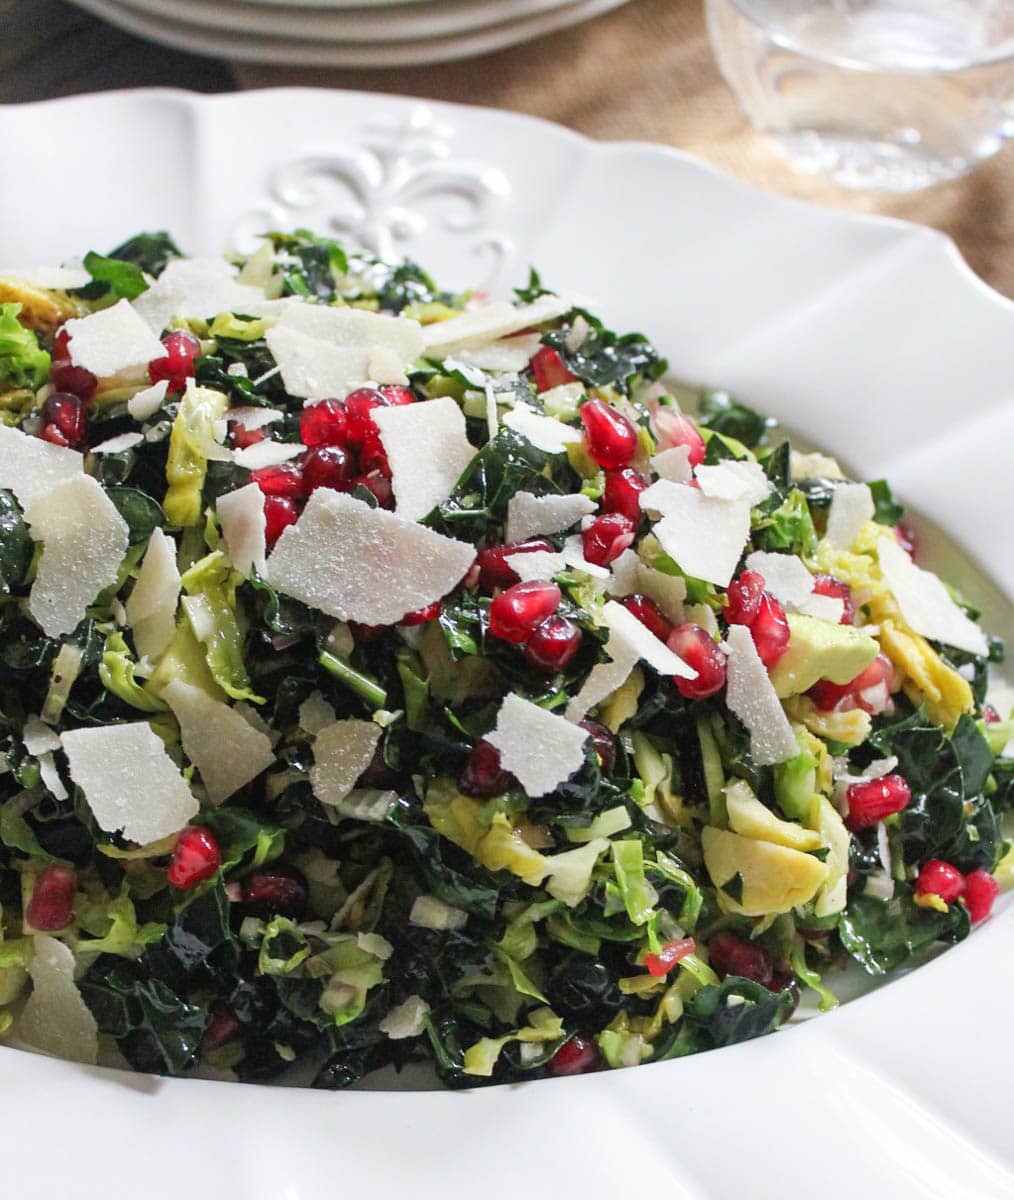 massaged-kale-and-shaved-brussels-sprouts-salad-with-pomegranate-and-avocado-8